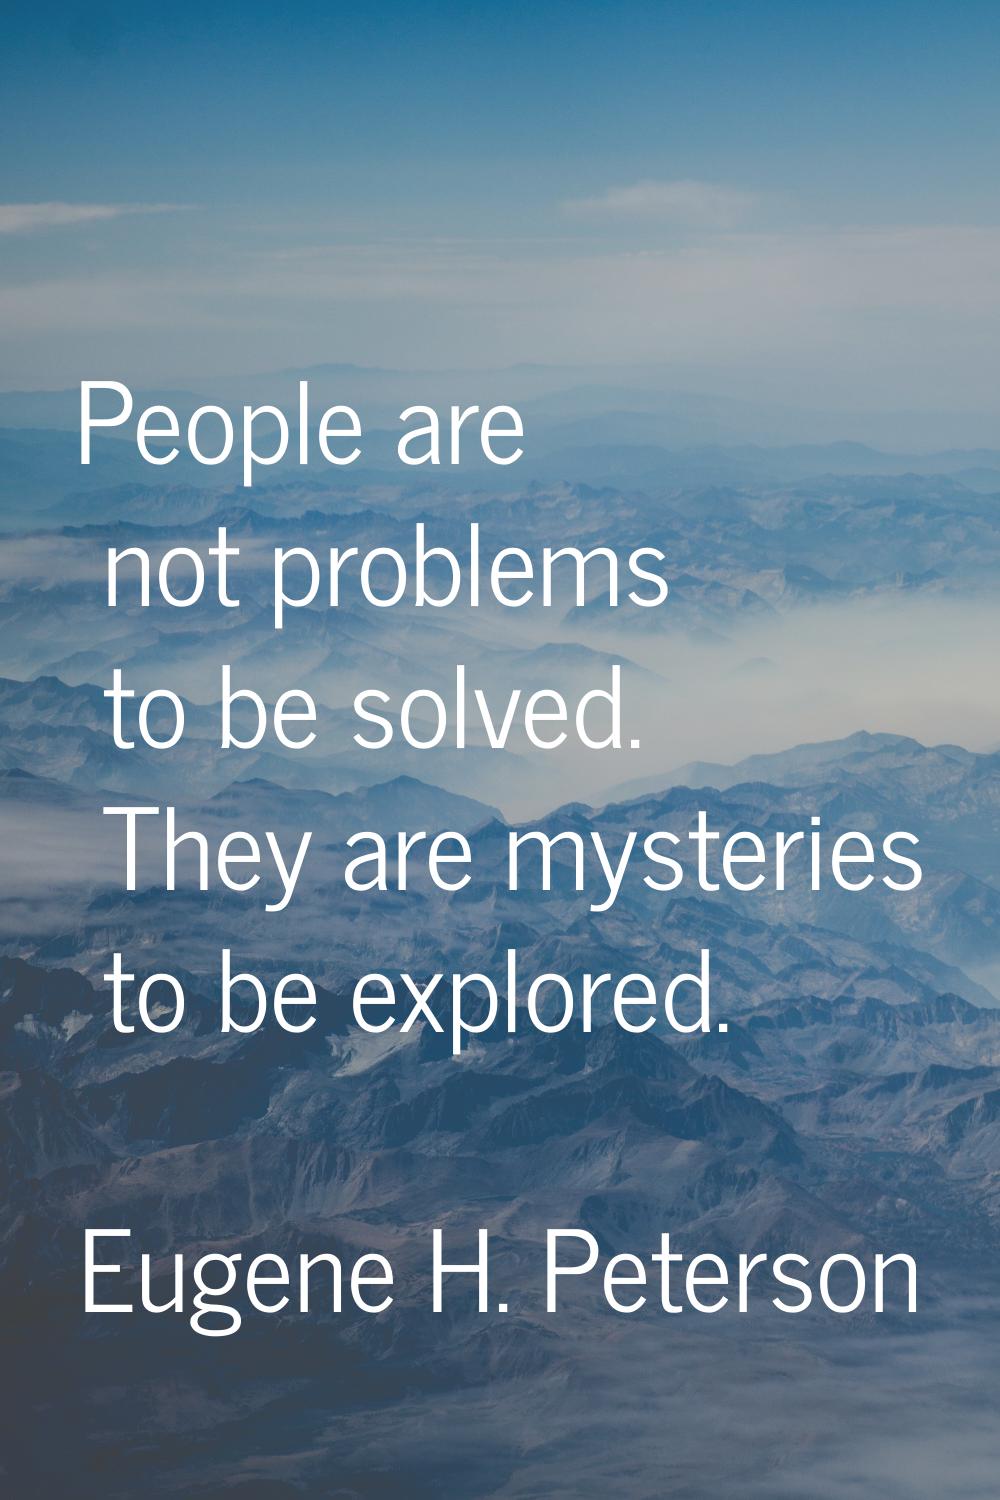 People are not problems to be solved. They are mysteries to be explored.